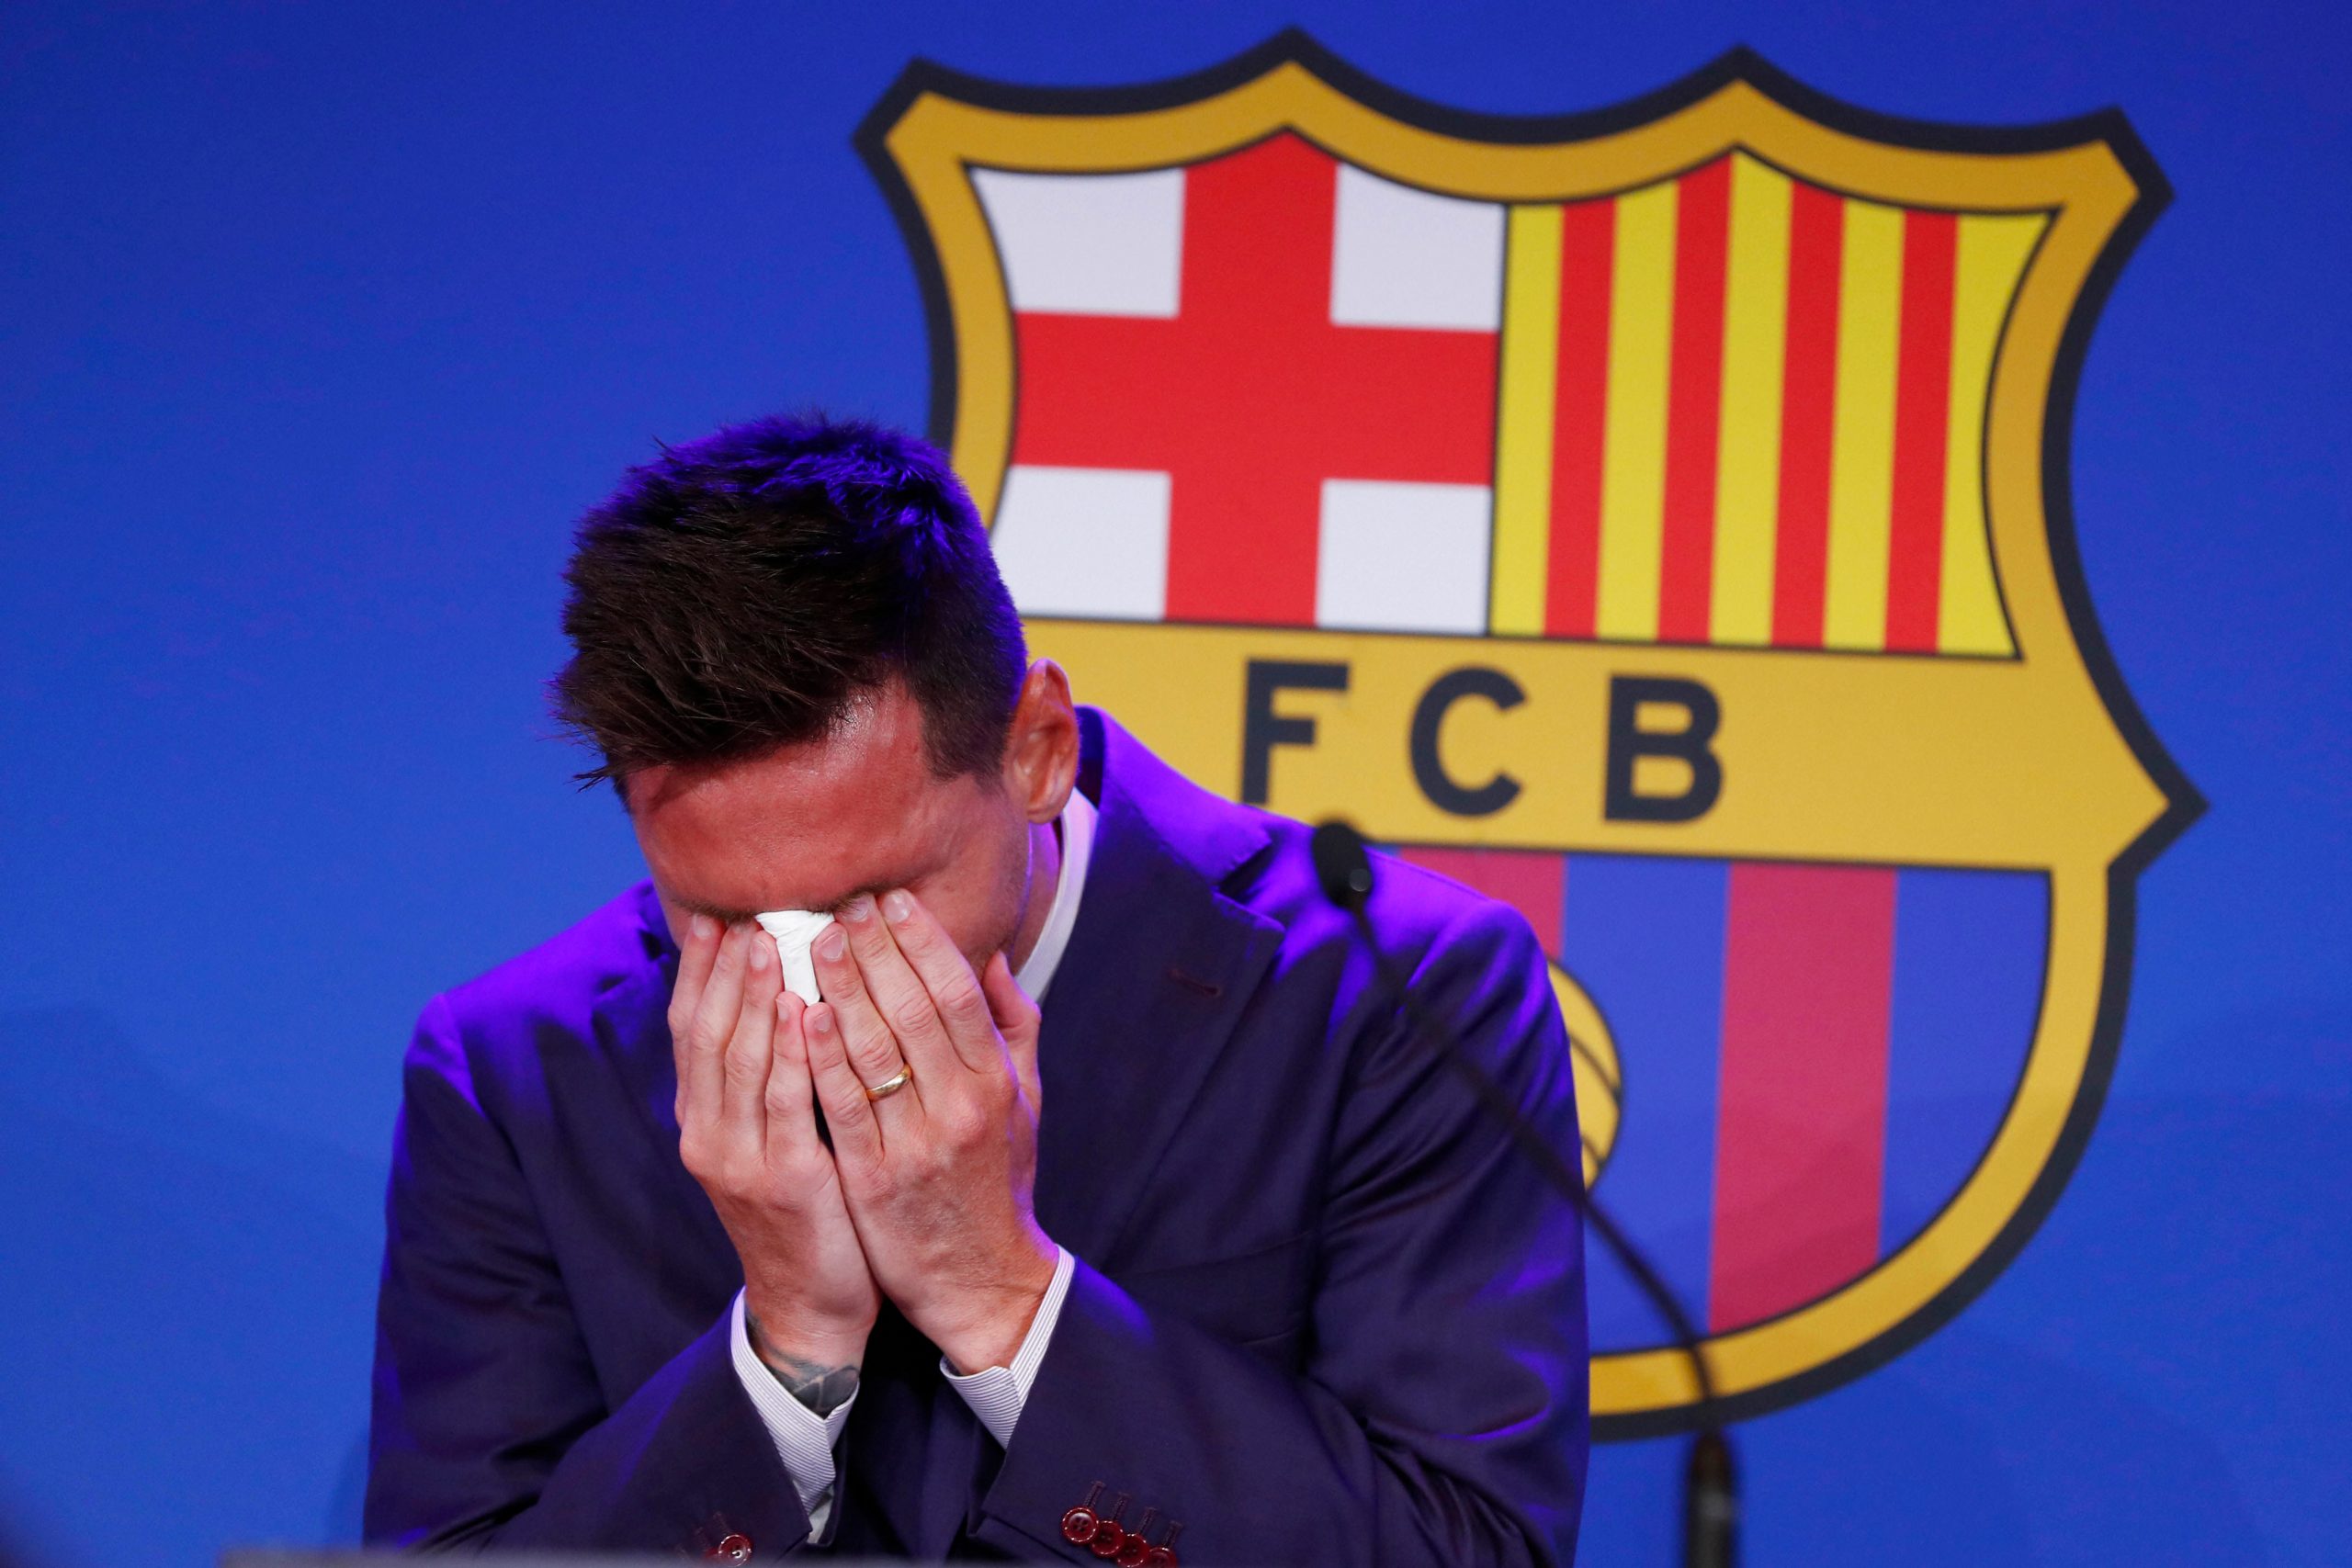 Barcelona, Ronald Koeman hoping to ‘turn the page’ after Lionel Messi’s departure